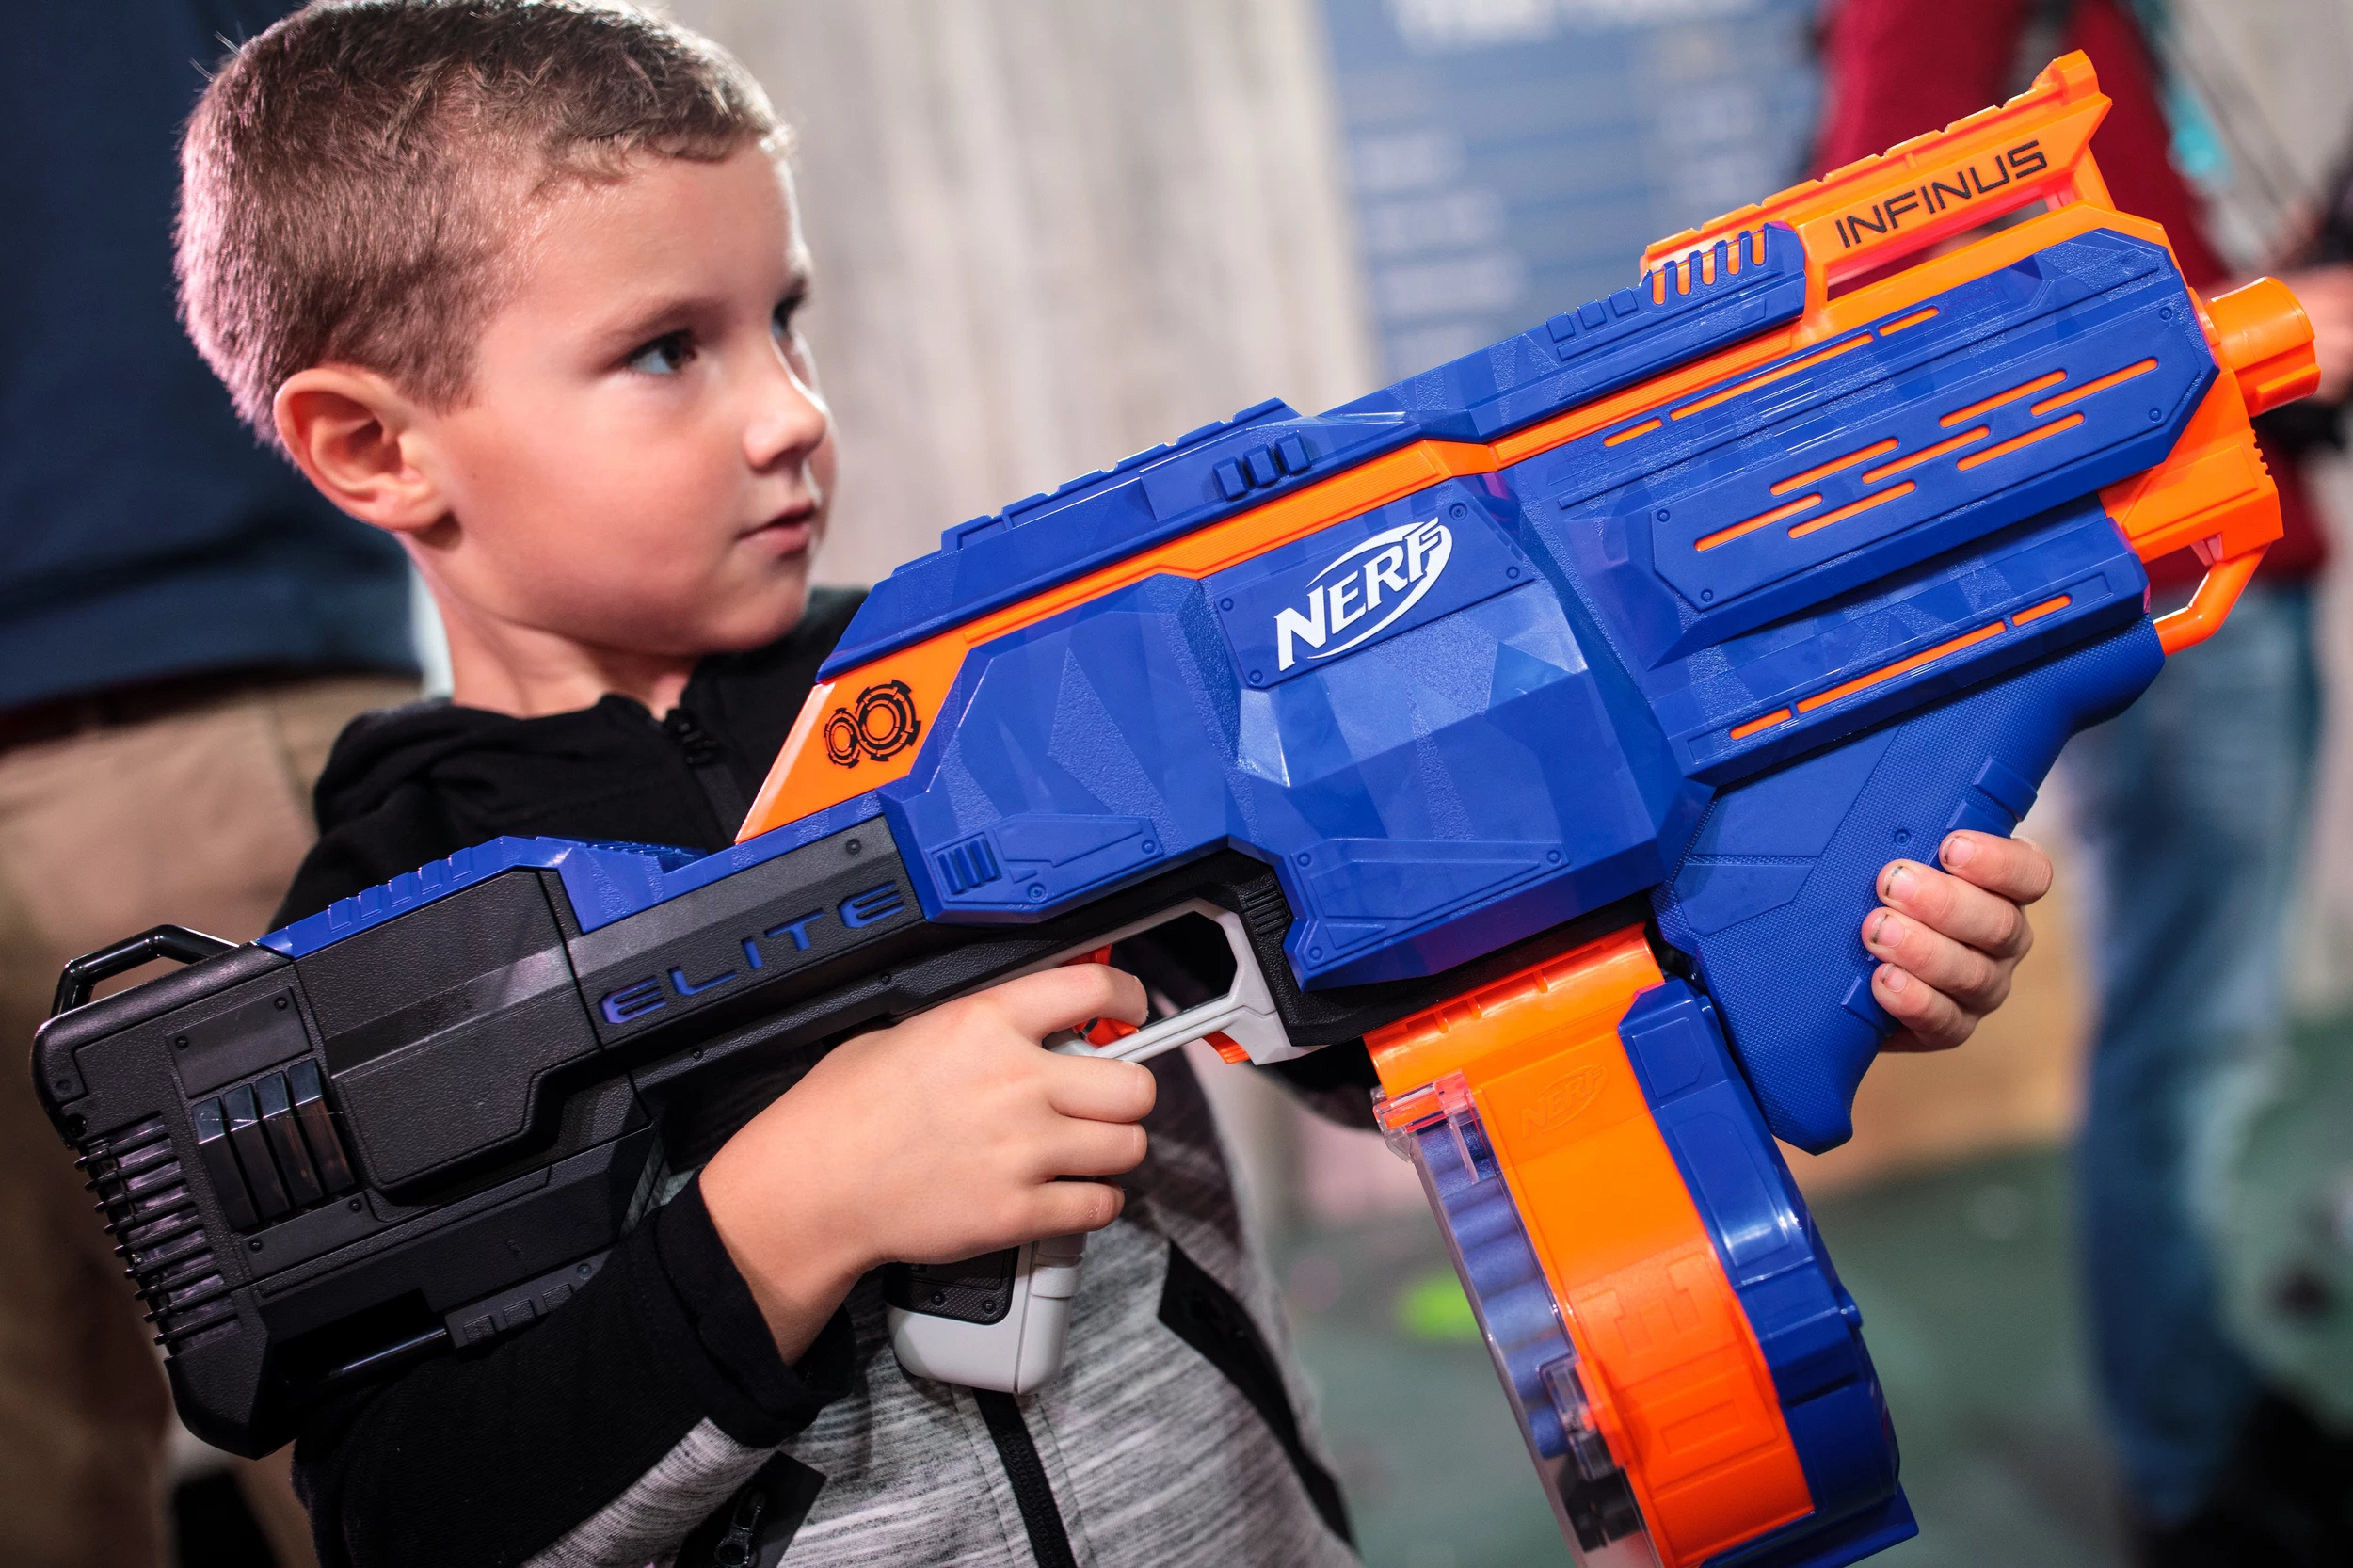 World's Largest Nerf Set for AT&T Stadium in Dallas